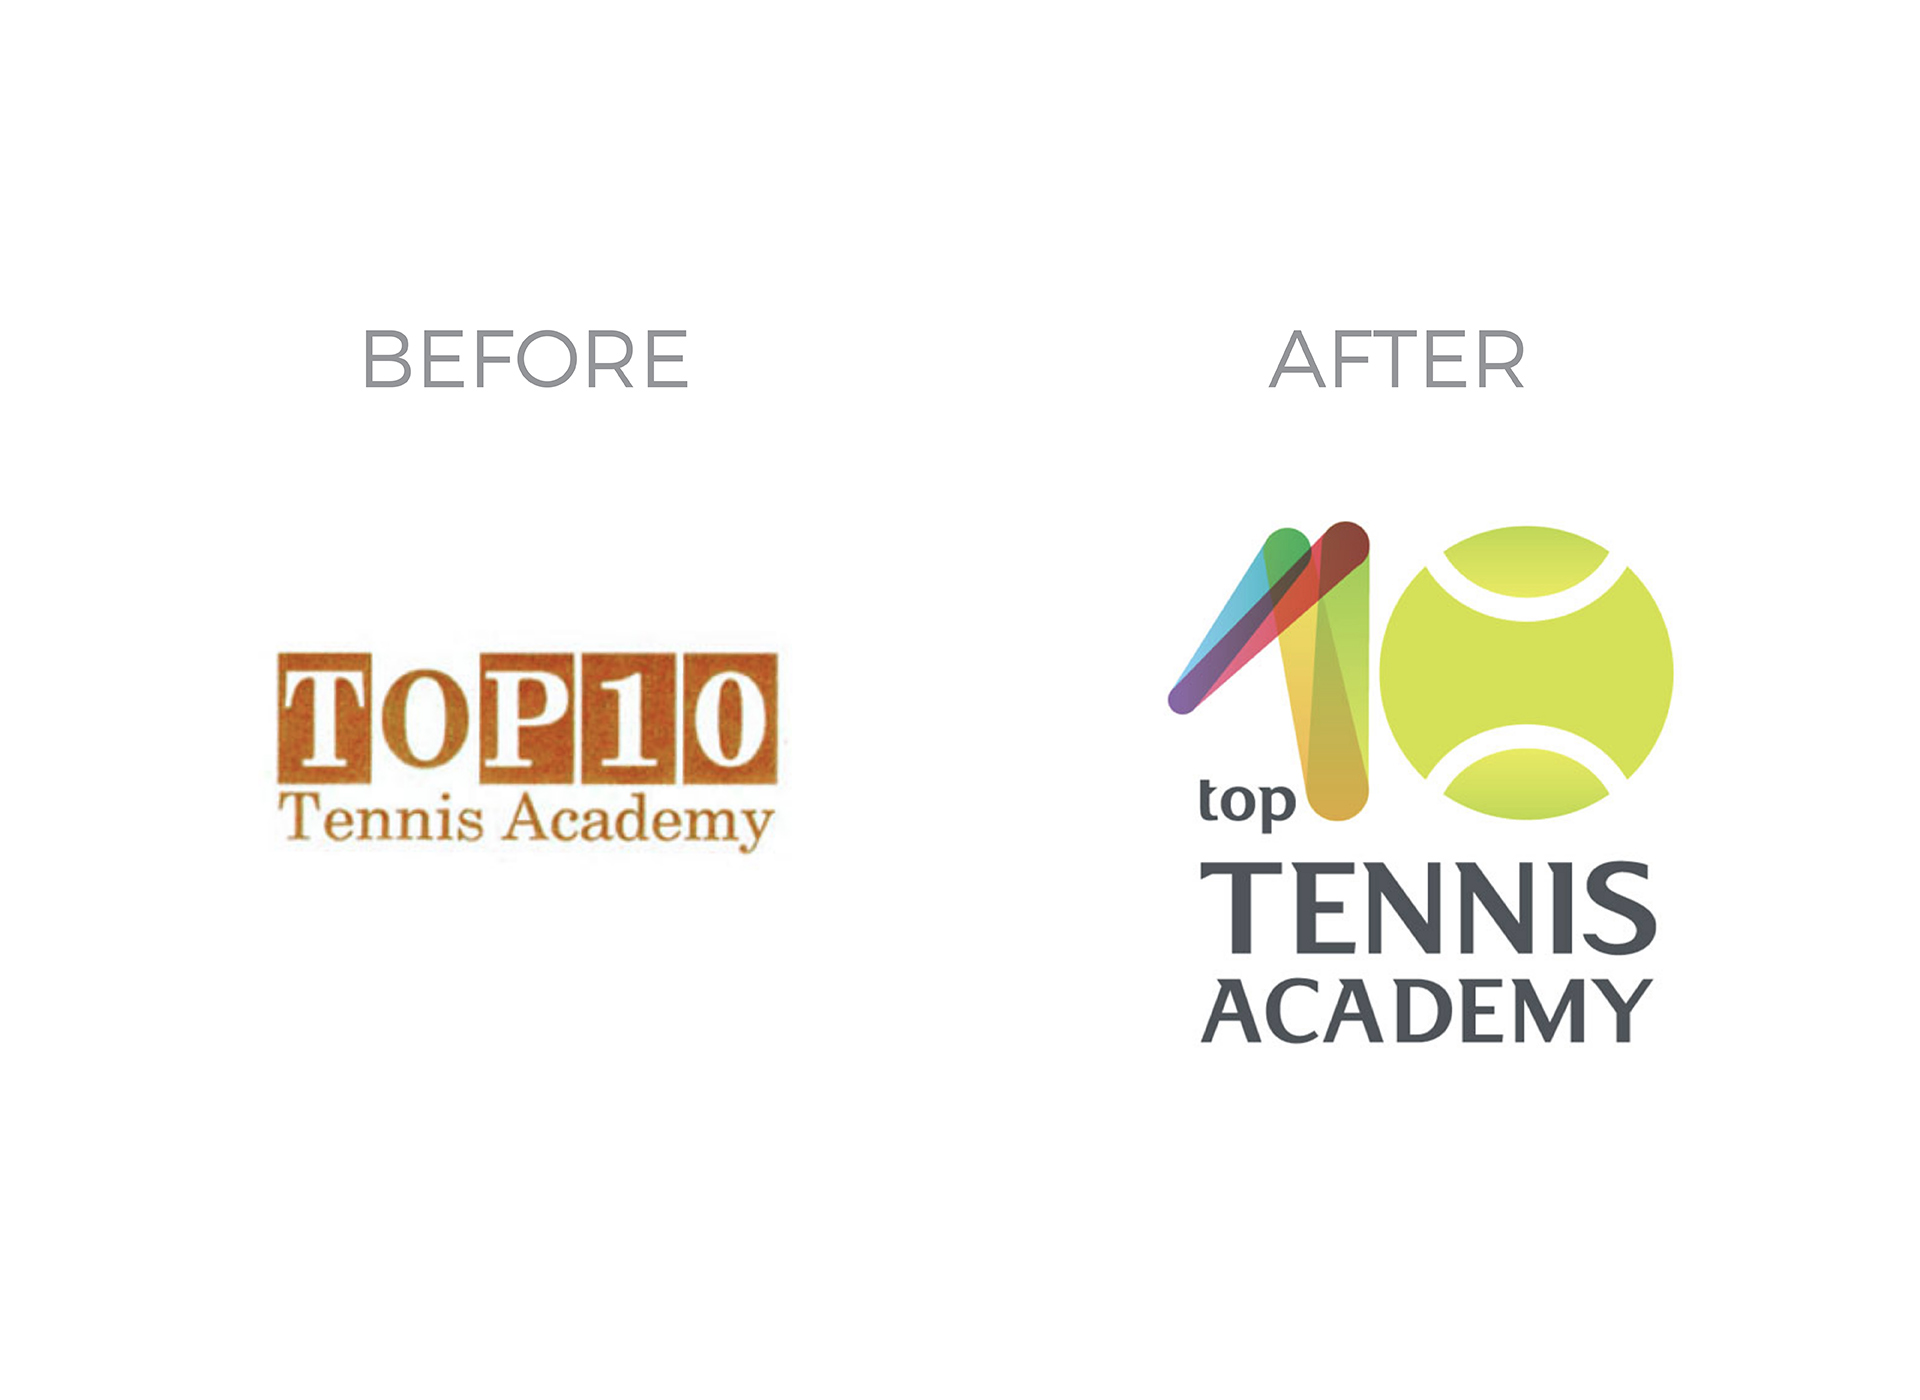 top 10 tennis portfolio before and after rebranding